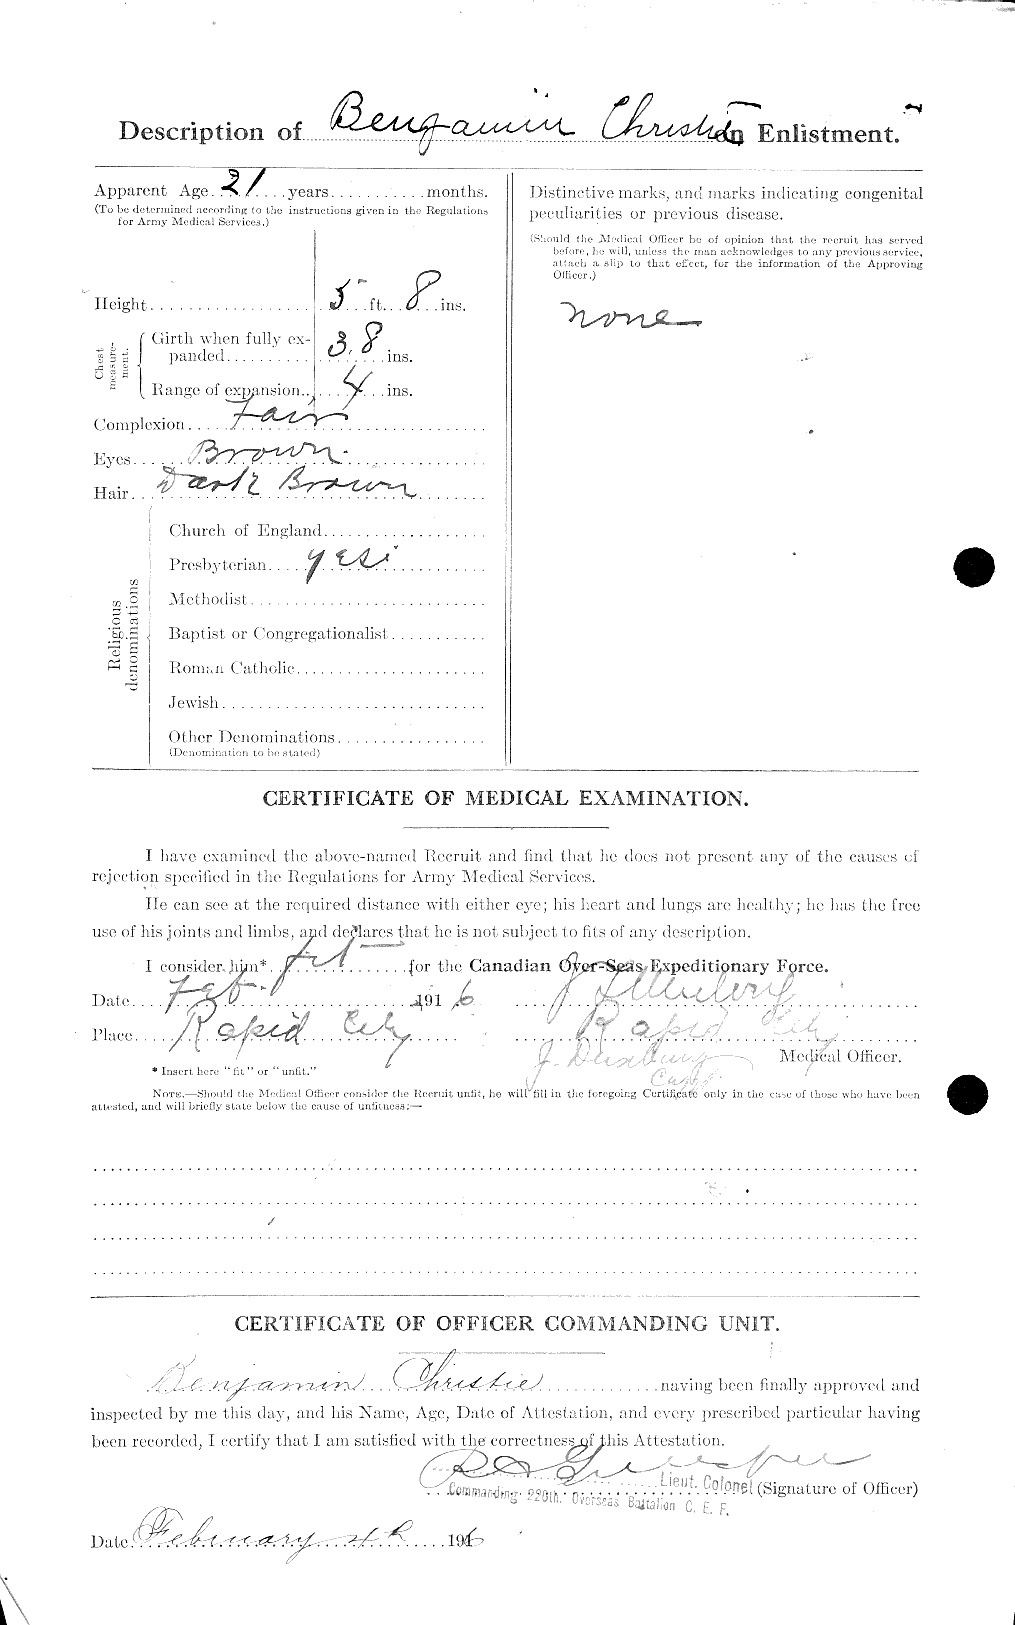 Personnel Records of the First World War - CEF 021883b